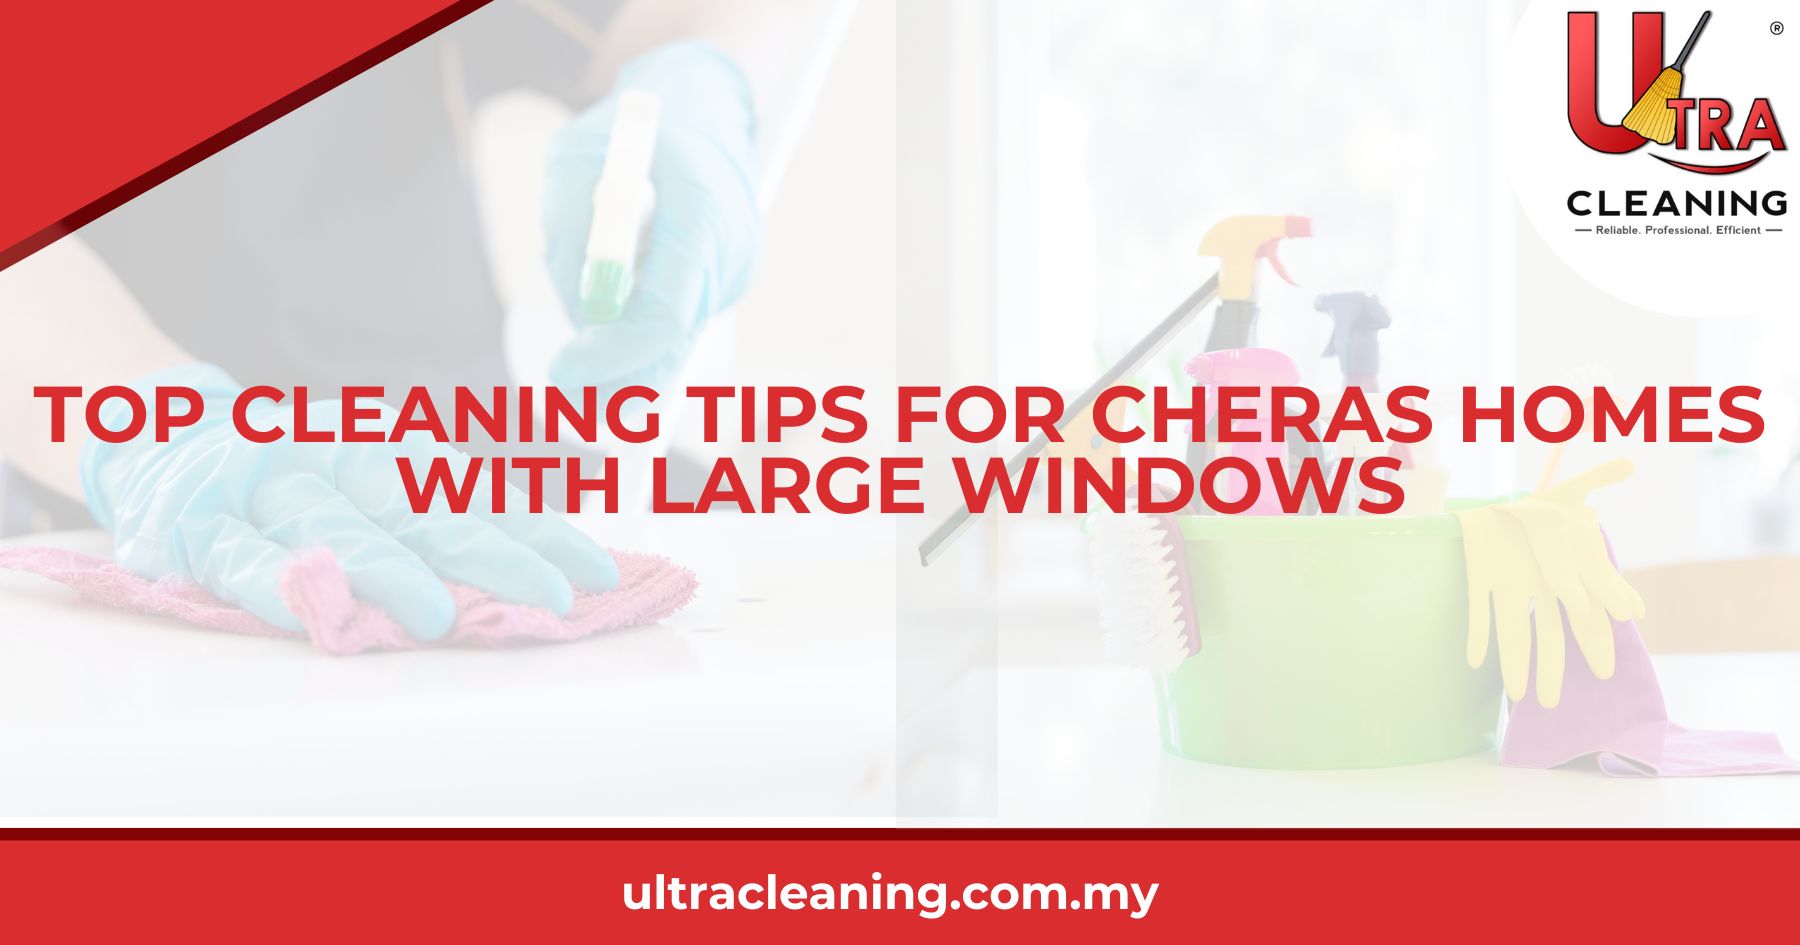 Top Cleaning Tips for Cheras Homes with Large Windows